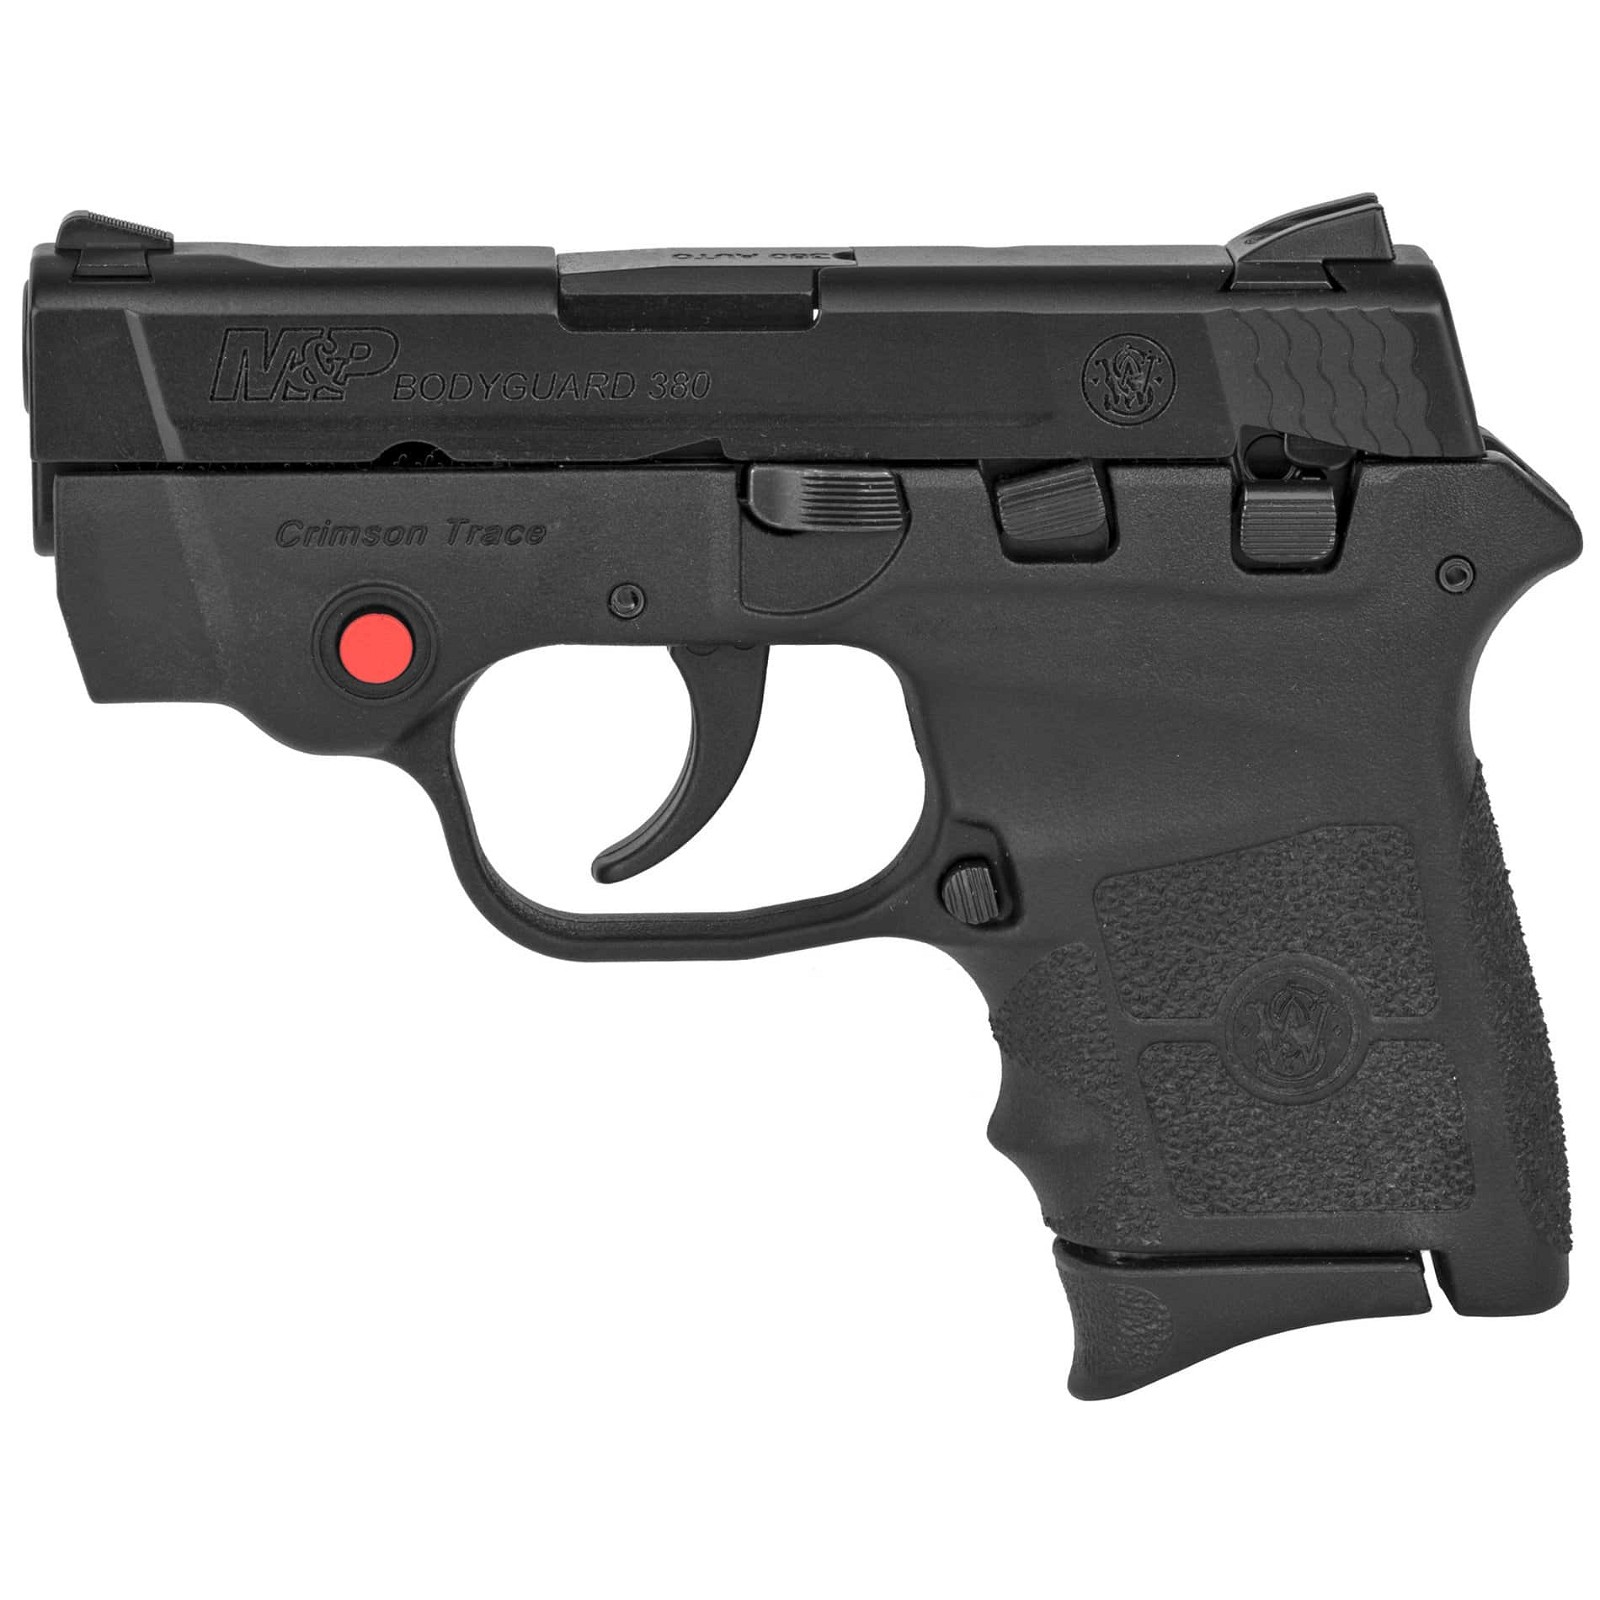 Smith & Wesson M&P Bodyguard 380 ACP Pistol - Compact Protection with Integrated Laser